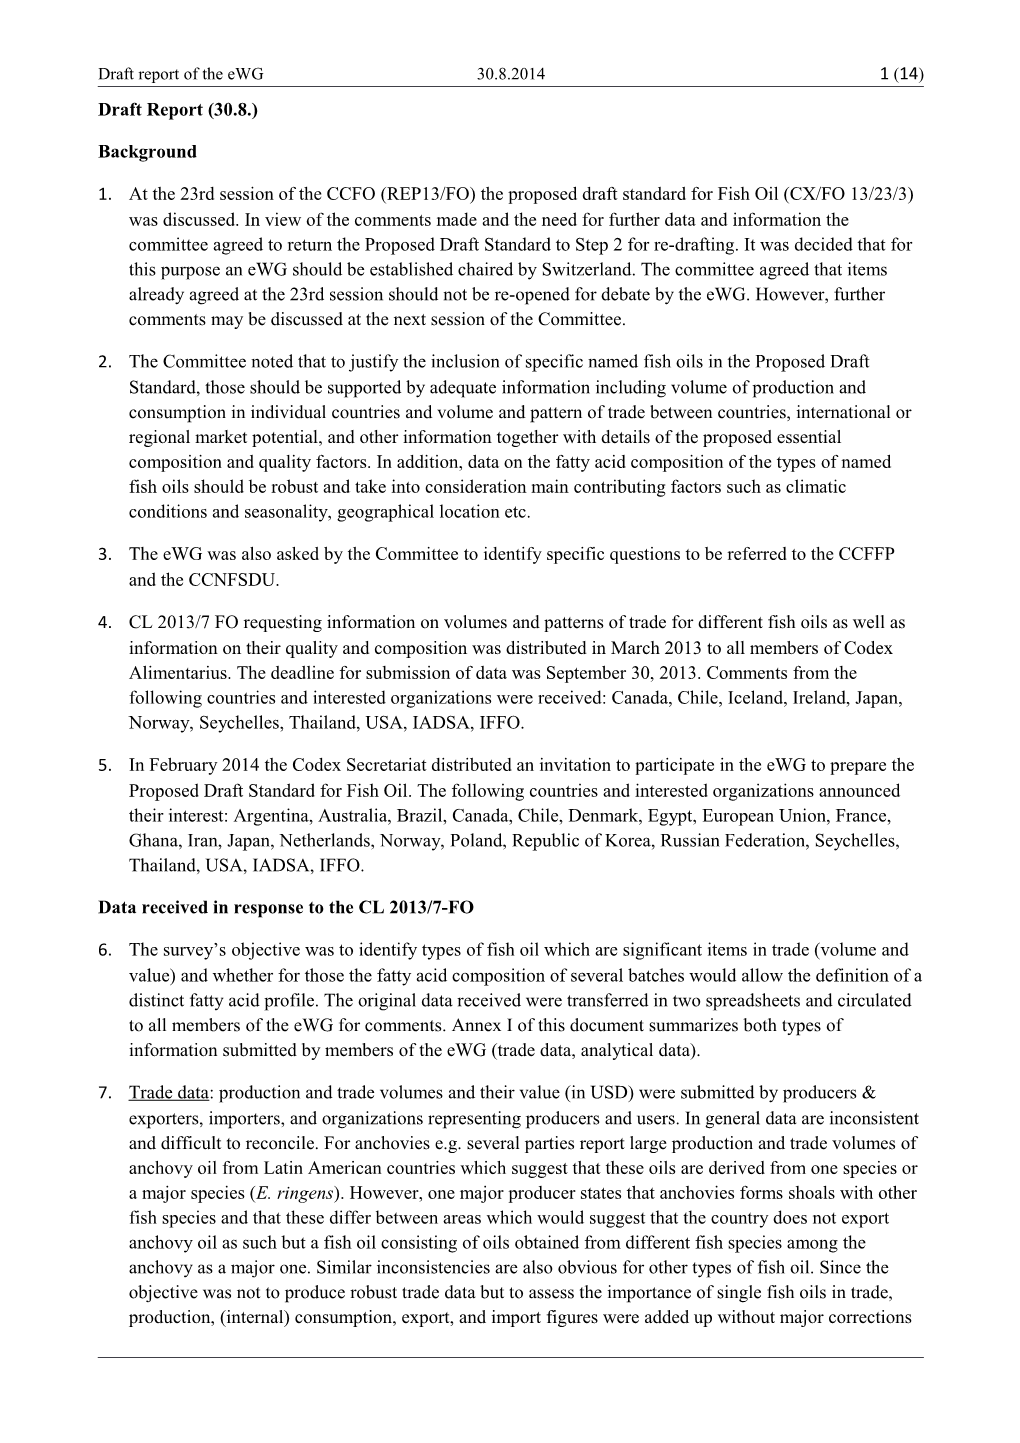 Draft Report of the Ewg30.8.20141 (15)